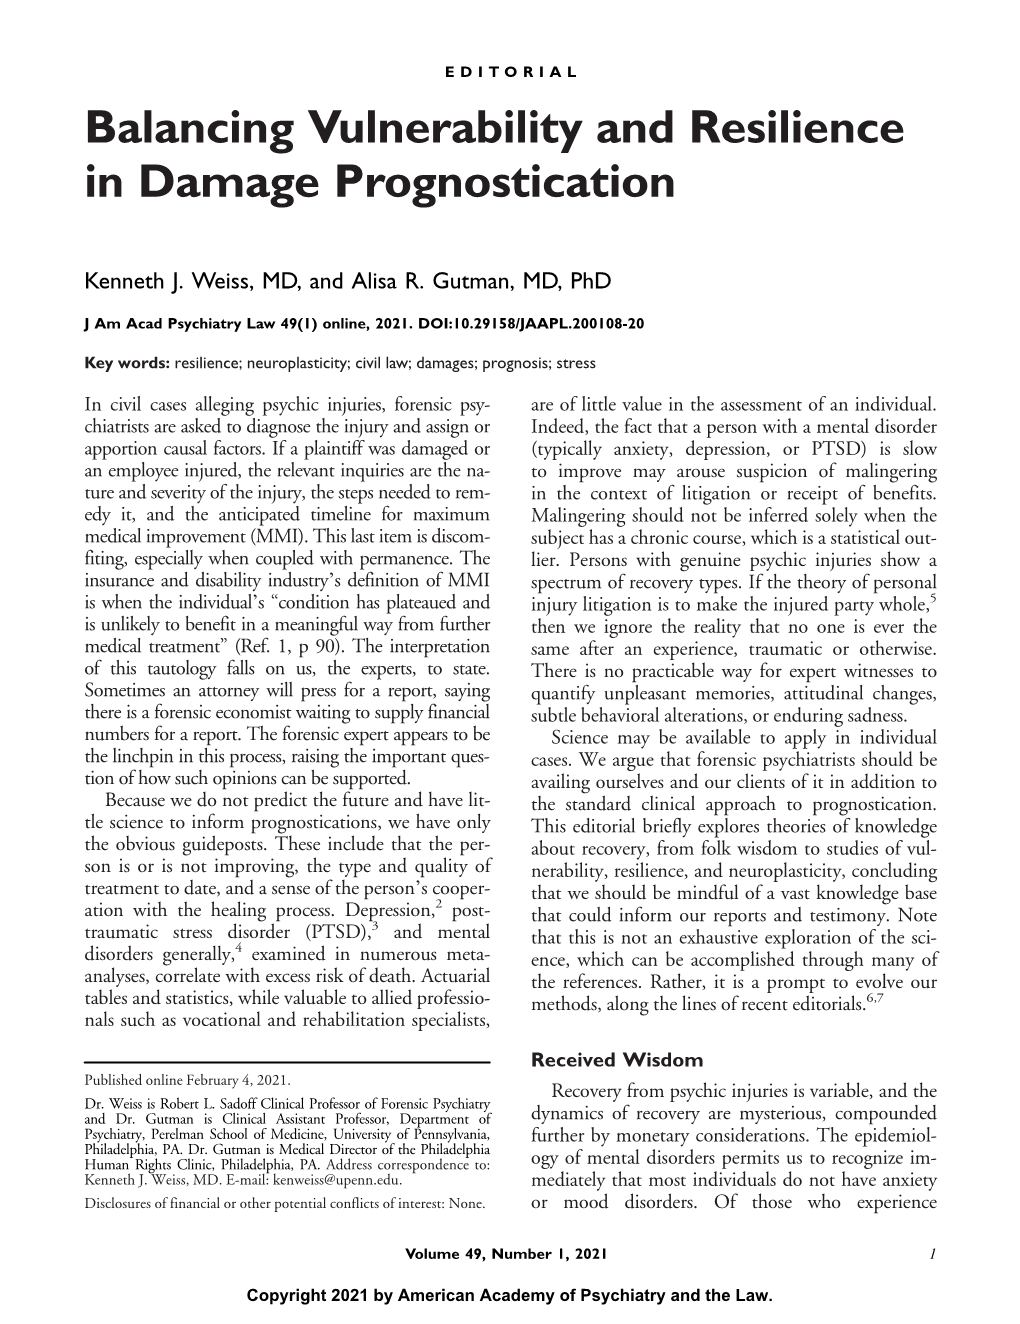 Balancing Vulnerability and Resilience in Damage Prognostication